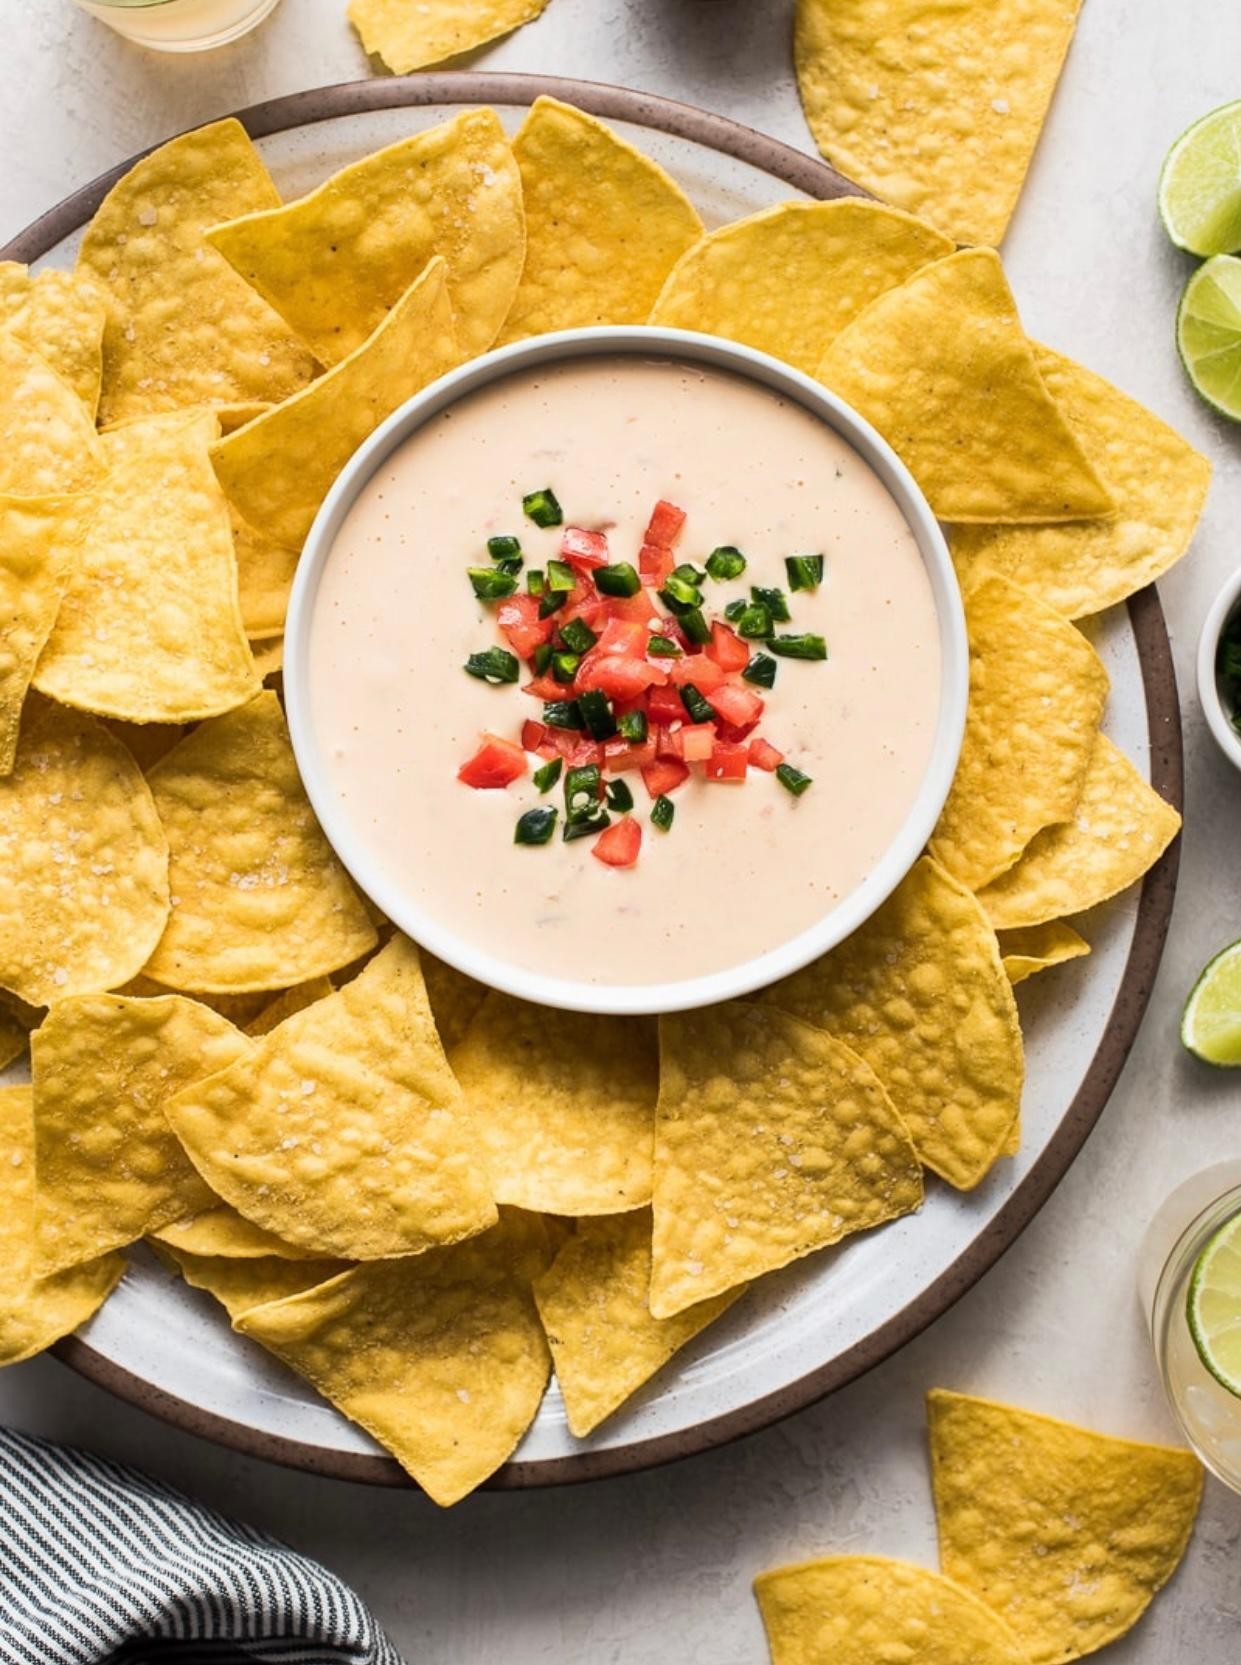 Chips and Queso/Salsa